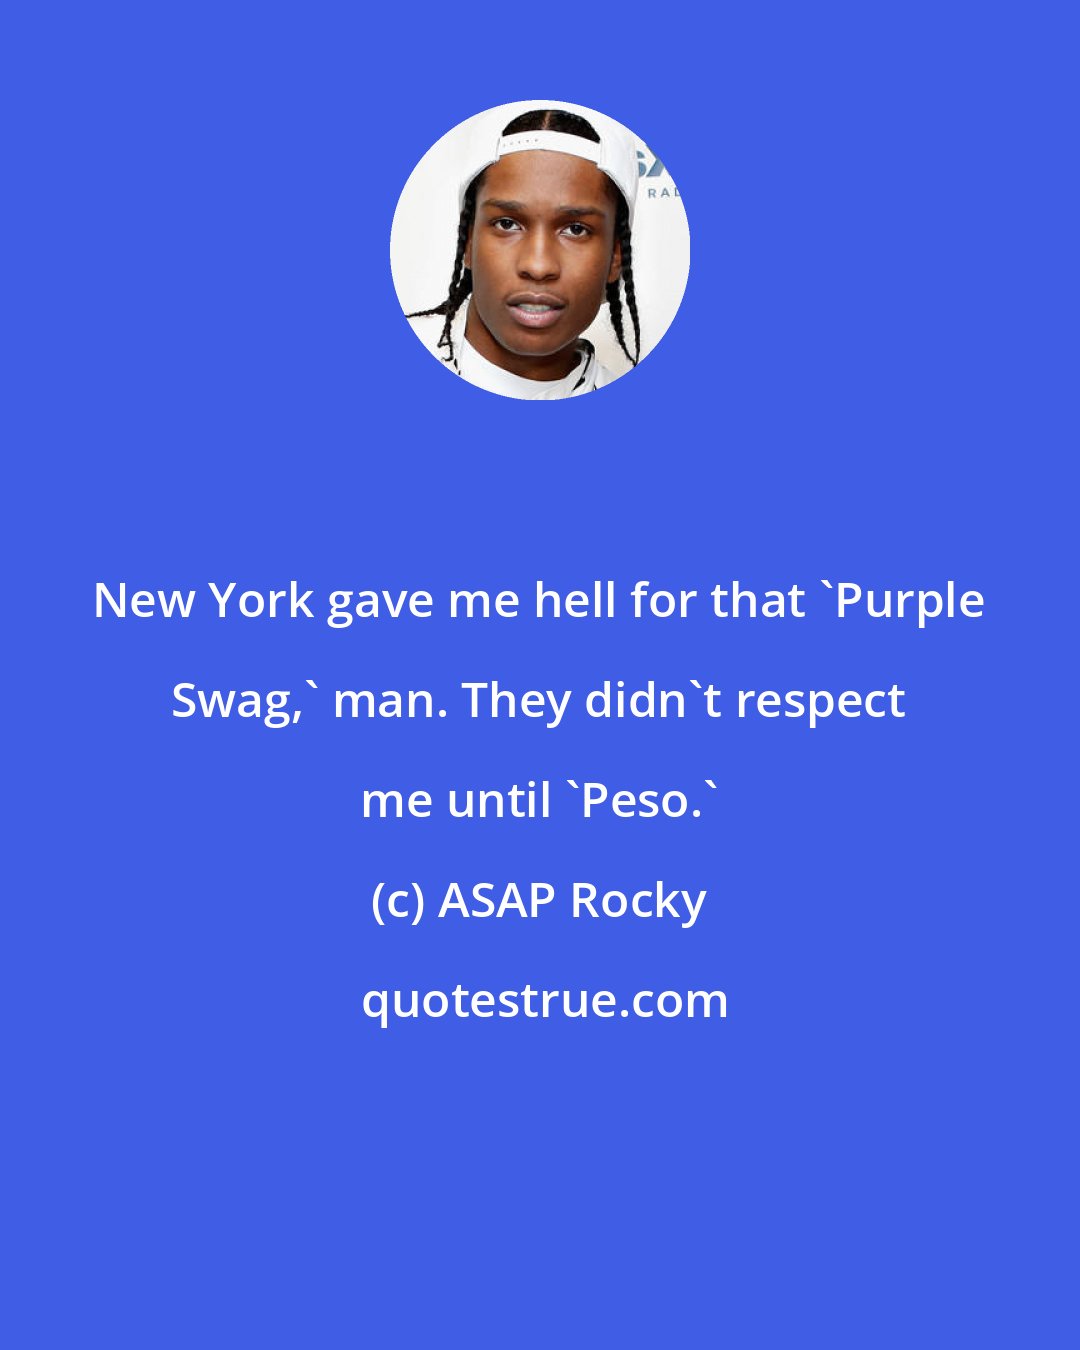 ASAP Rocky: New York gave me hell for that 'Purple Swag,' man. They didn't respect me until 'Peso.'